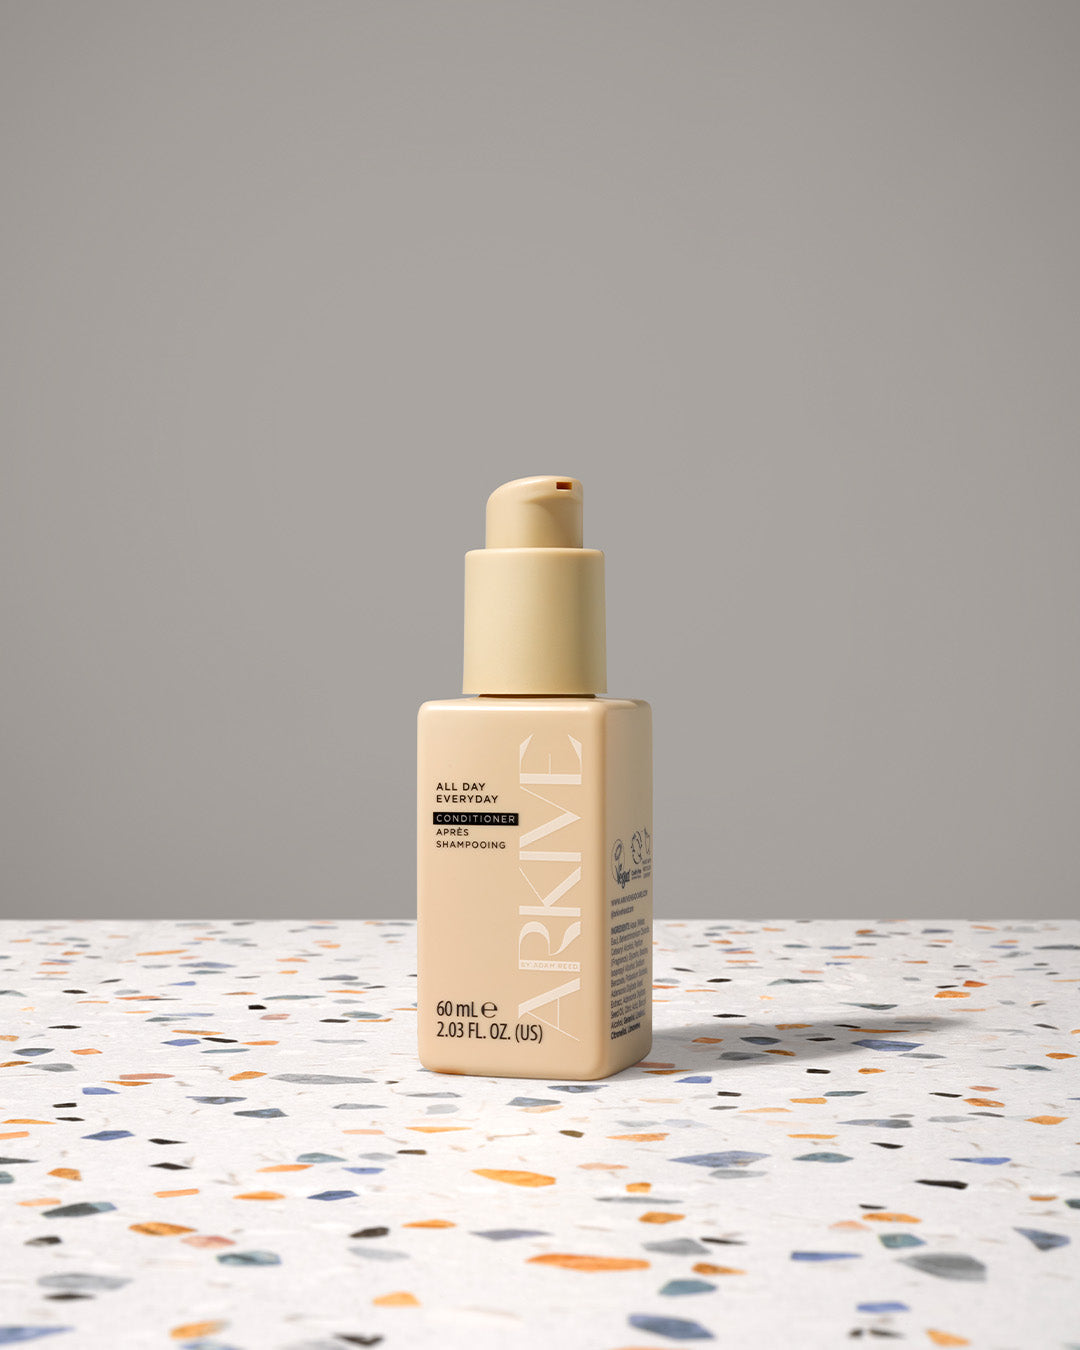 Miniature bottle of Arkive's all day everyday conditioner on a table